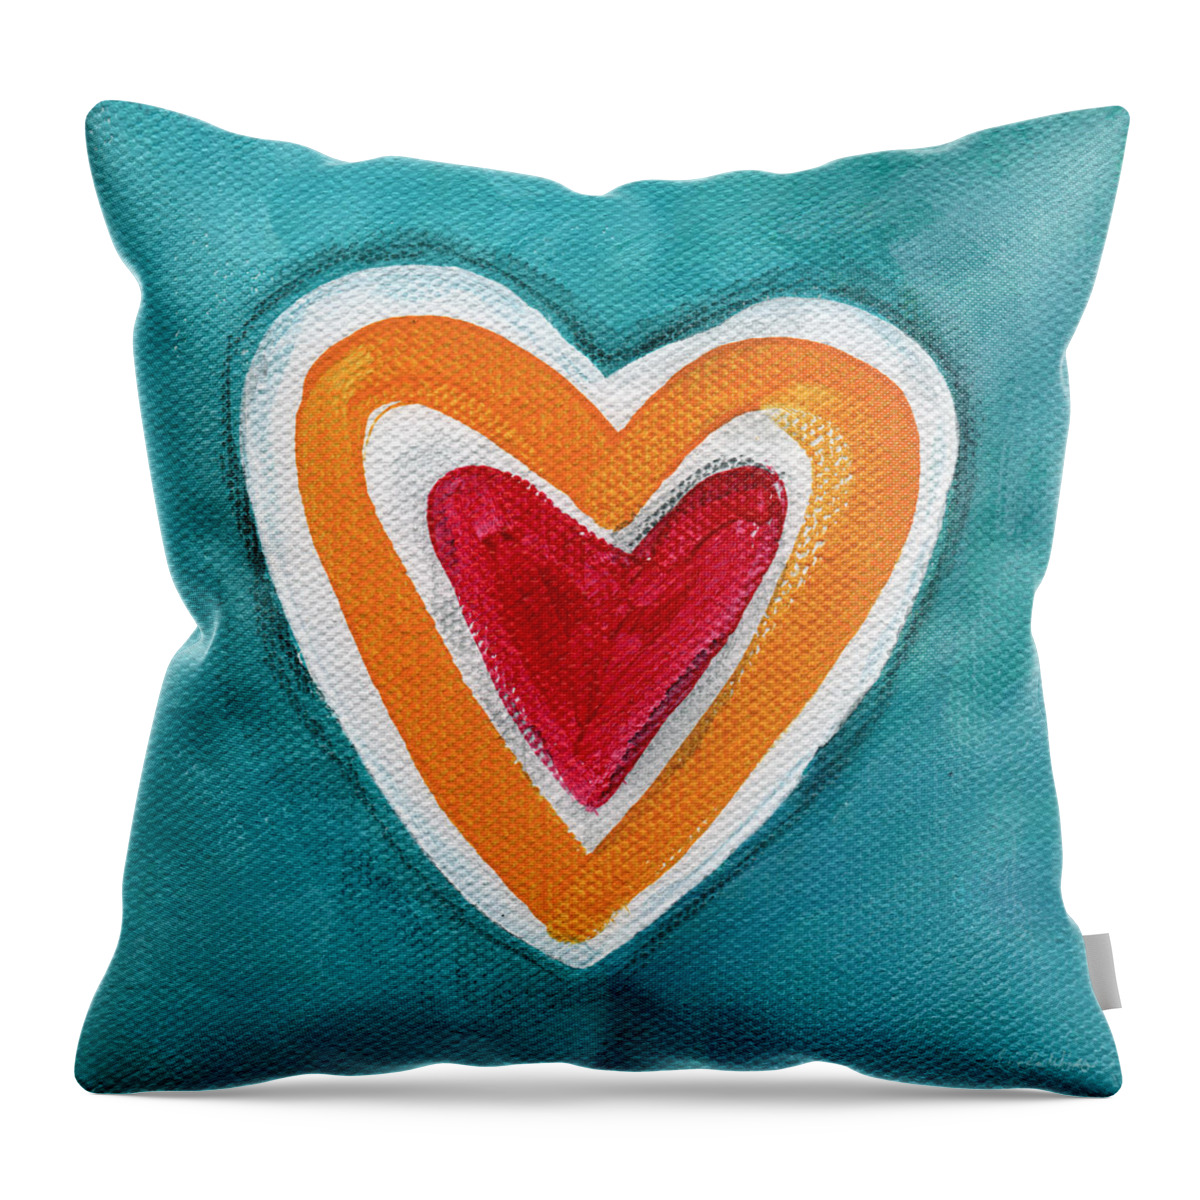 Love Hearts Romance Family Valentine Painting Heart Painting Blue Orange White Red Watercolor Ink Pop Art Bold Colors Bedroom Art Kitchen Art Living Room Art Gallery Wall Art Art For Interior Designers Hospitality Art Set Design Wedding Gift Art By Linda Woods Kids Room Art Dorm Room Pillow Throw Pillow featuring the painting Happy Love by Linda Woods